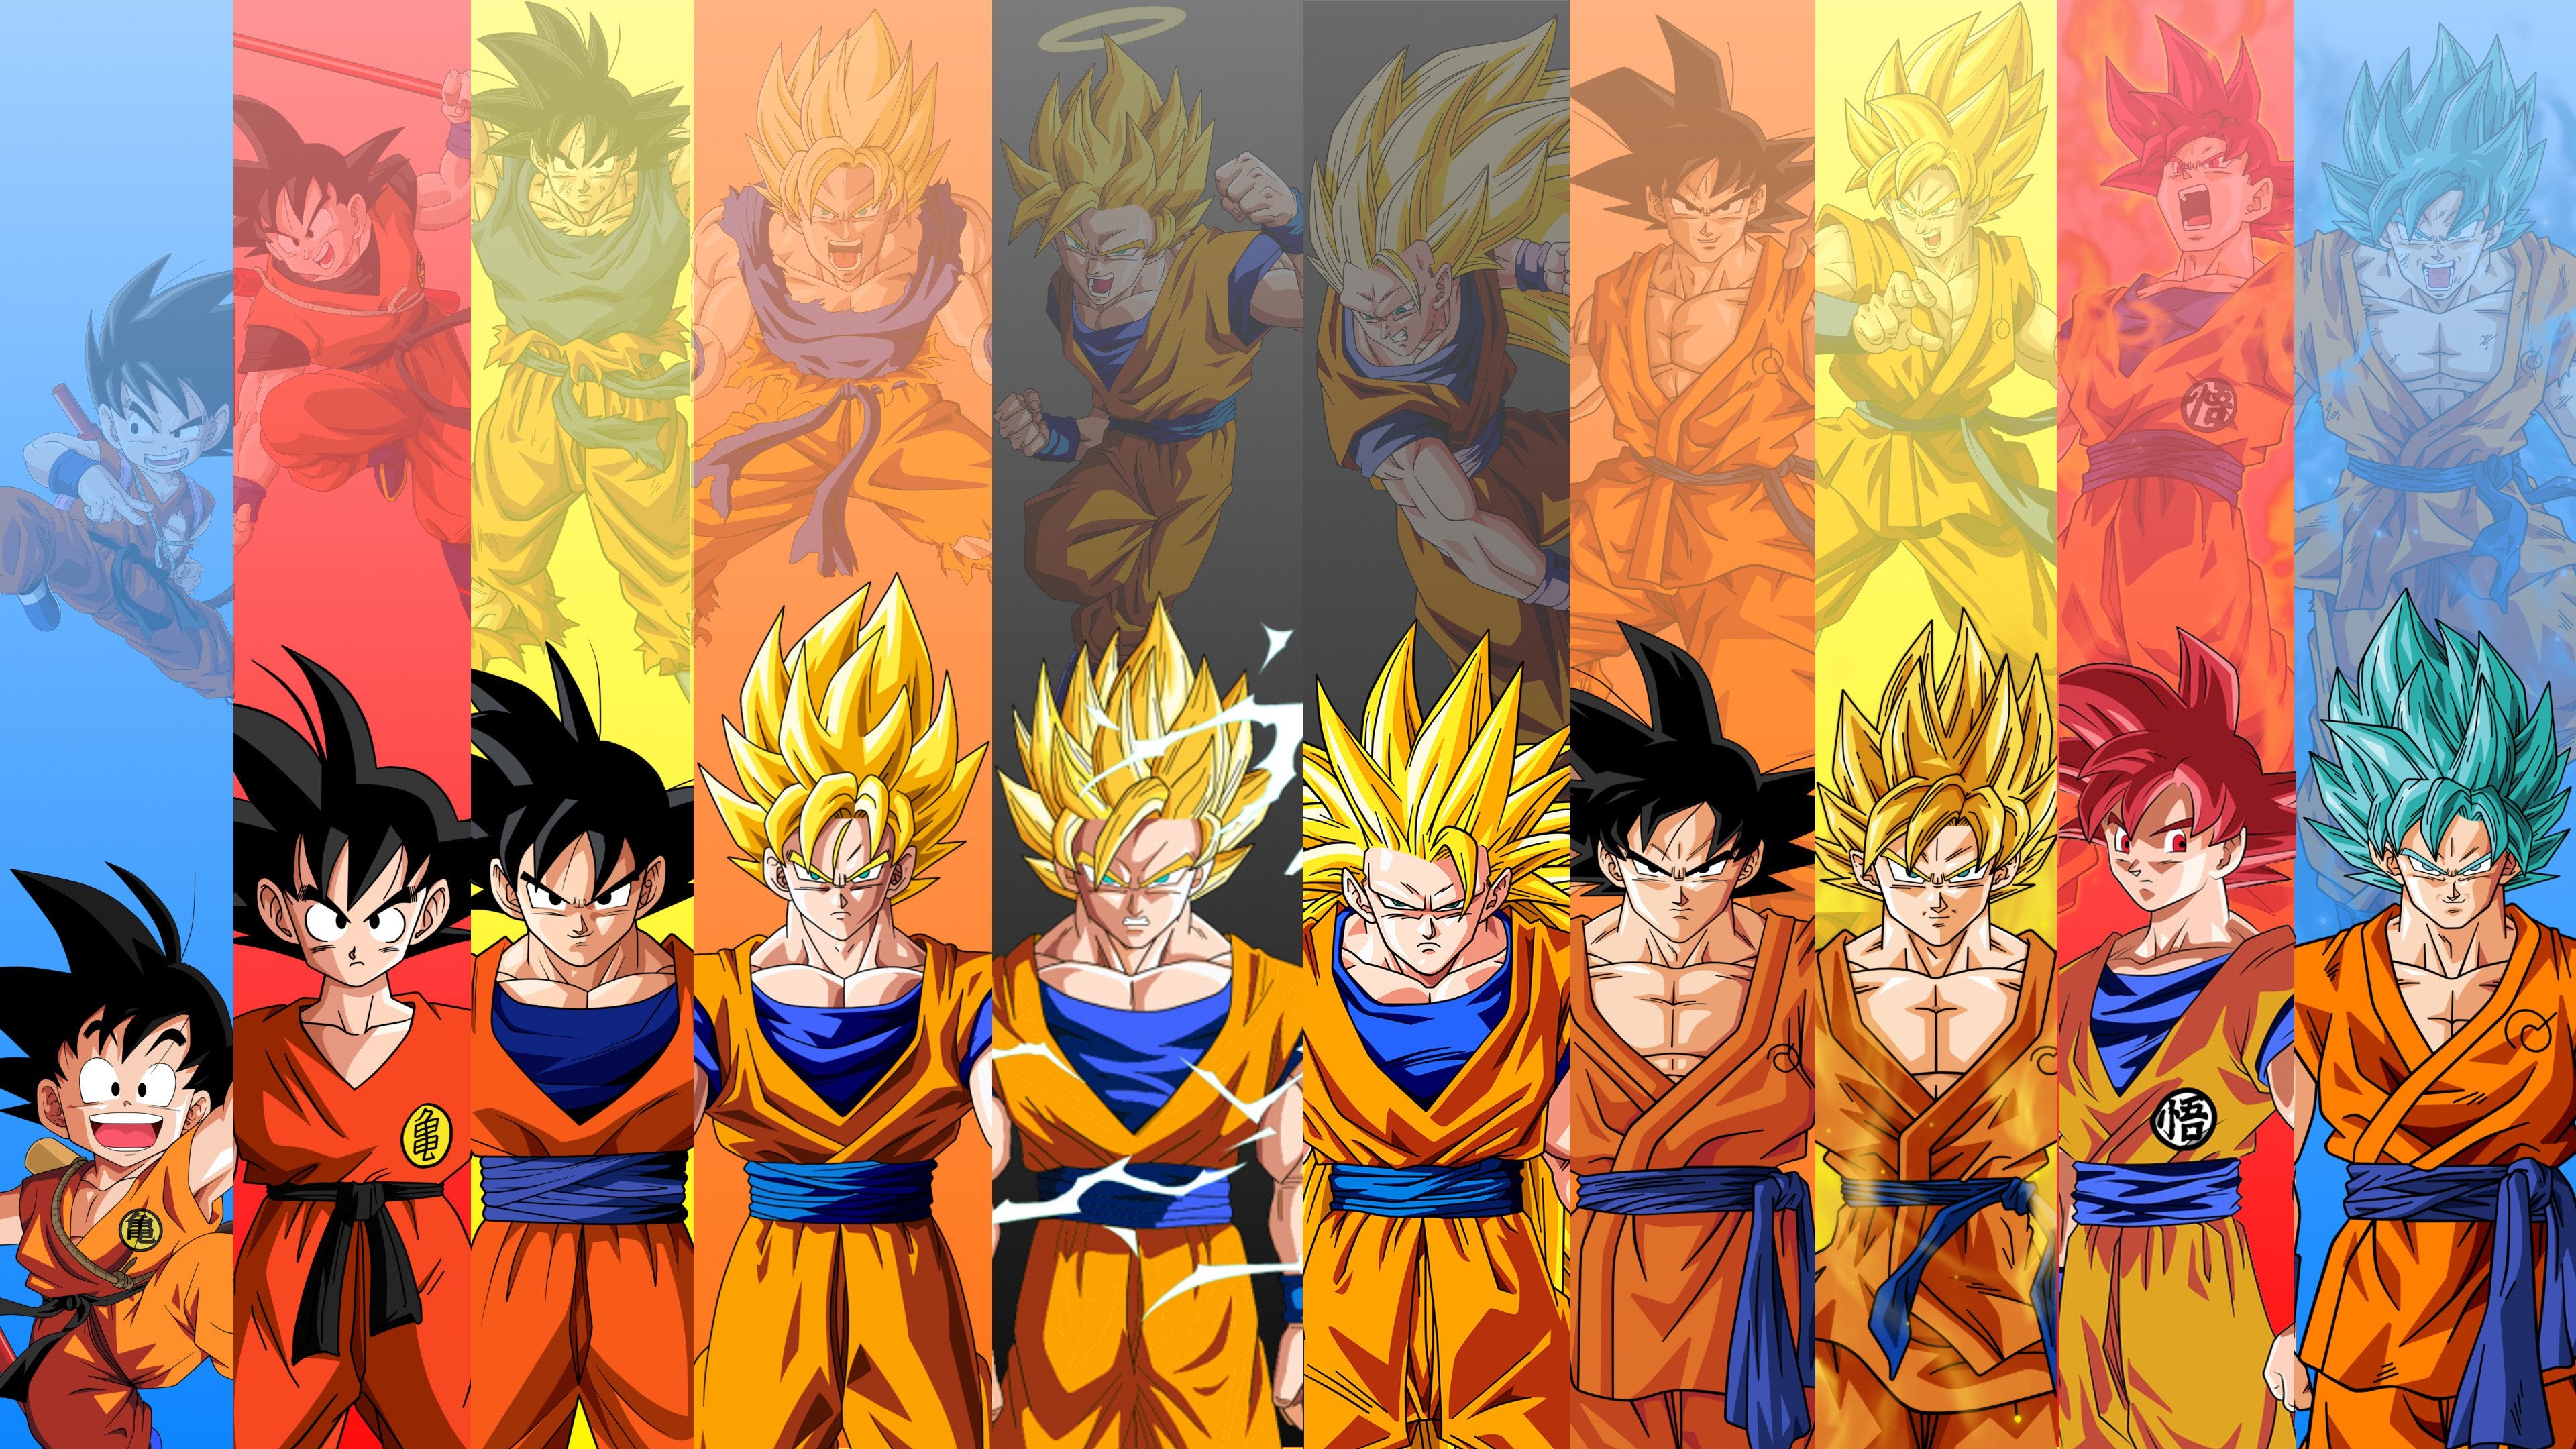 Just Made This 4k Wallpaper Featuring Forms Of Goku From Db